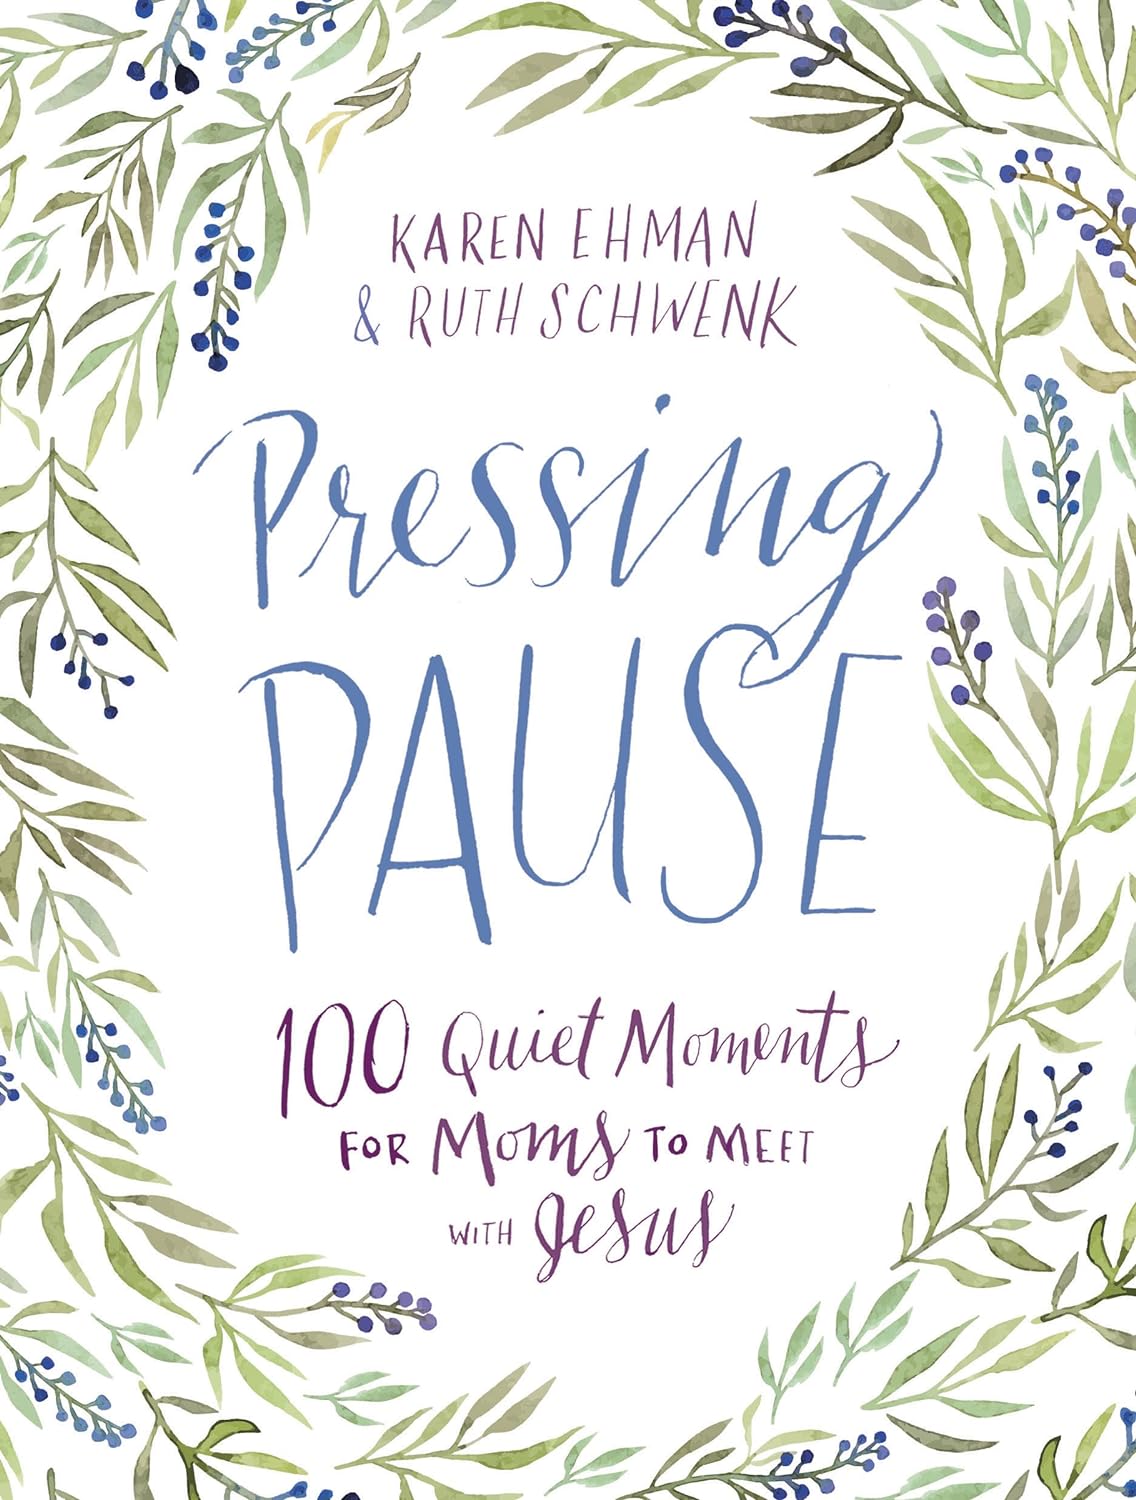 Pressing Pause - devotional for moms